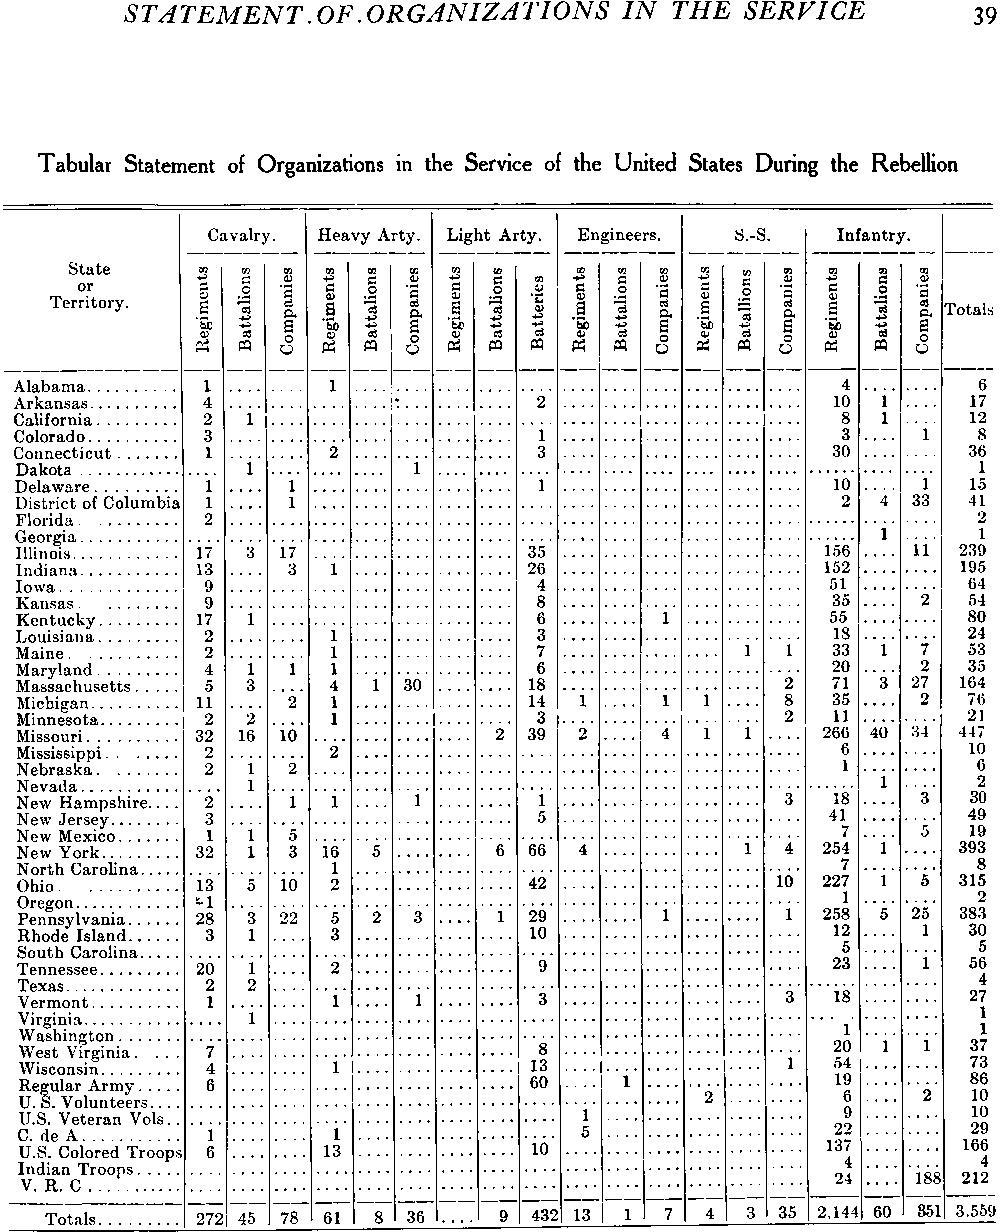 Official Ohio Civil War Soldiers by Units.jpg